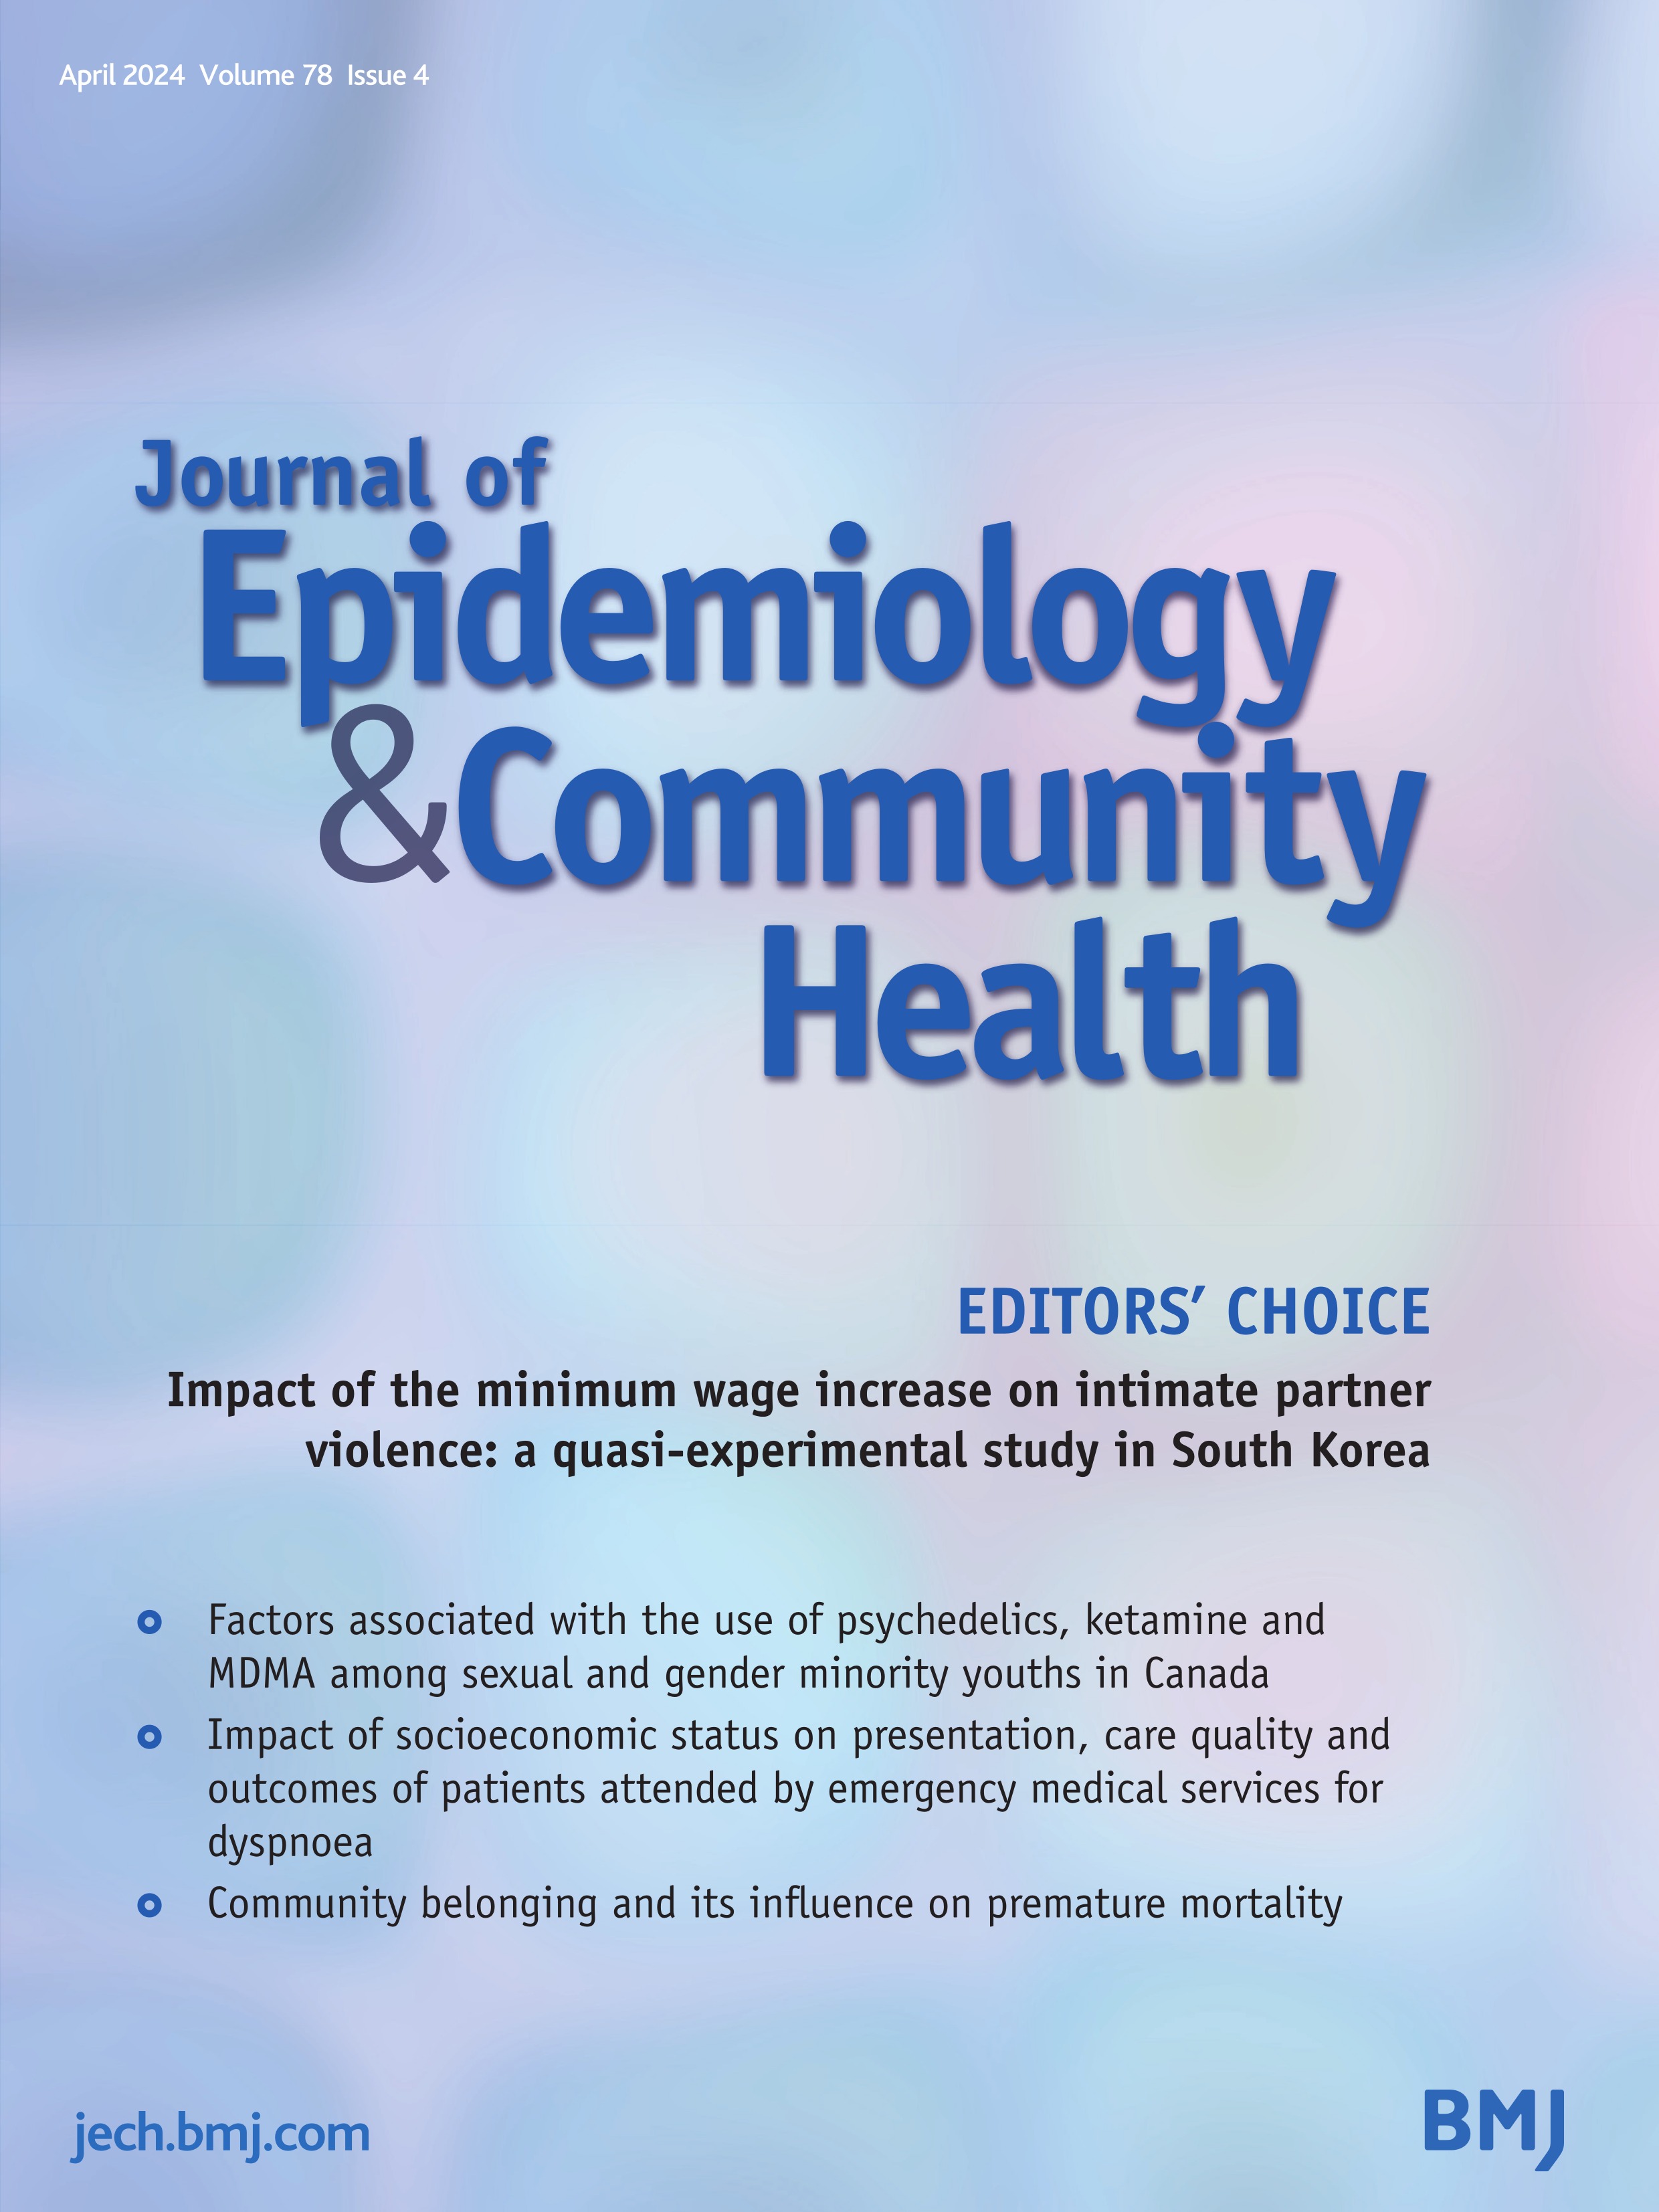 Evaluating bias with loss to follow-up in a community-based cohort: empirical investigation from the CARRS Study